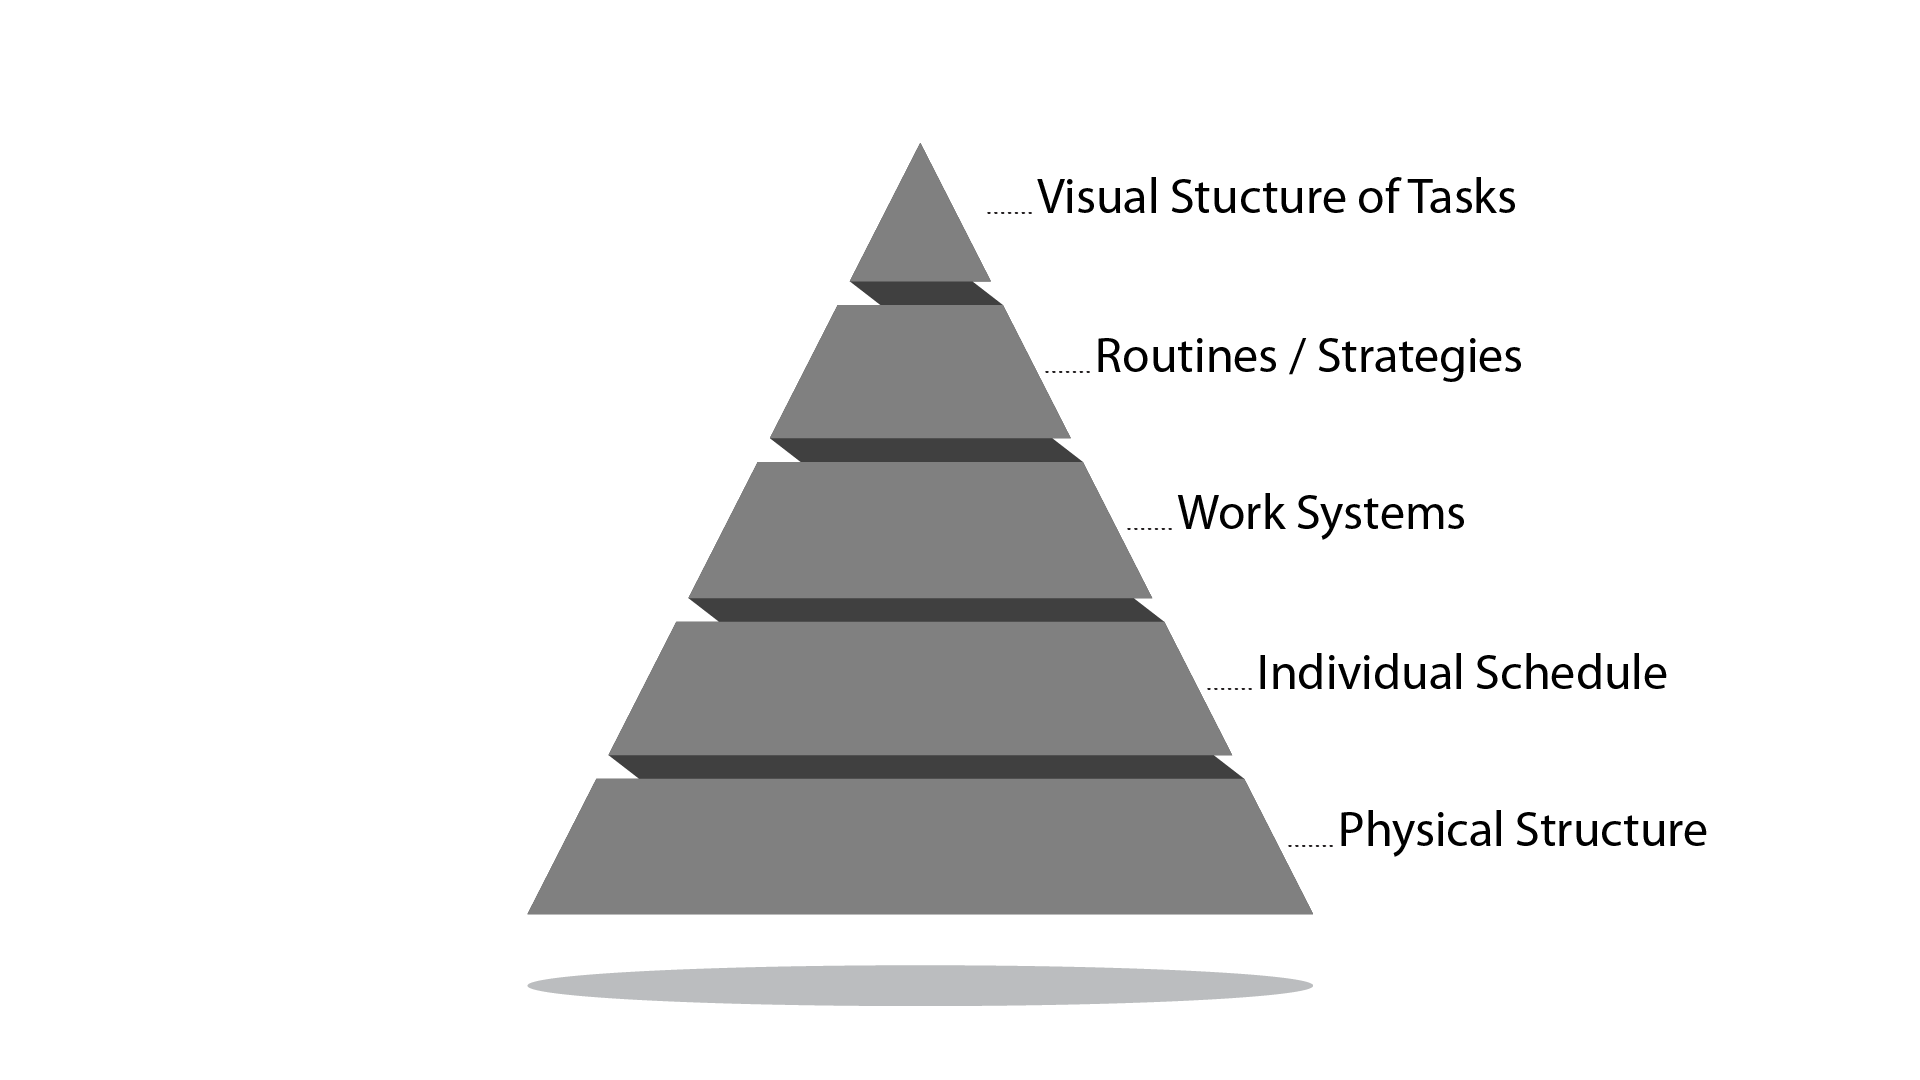 The components of visual supports are displayed in a pyramid. The bottom layer of the pyramid is physical structure, then individual structure, work systems, routines/strategies, and finally visual structure of tasks.